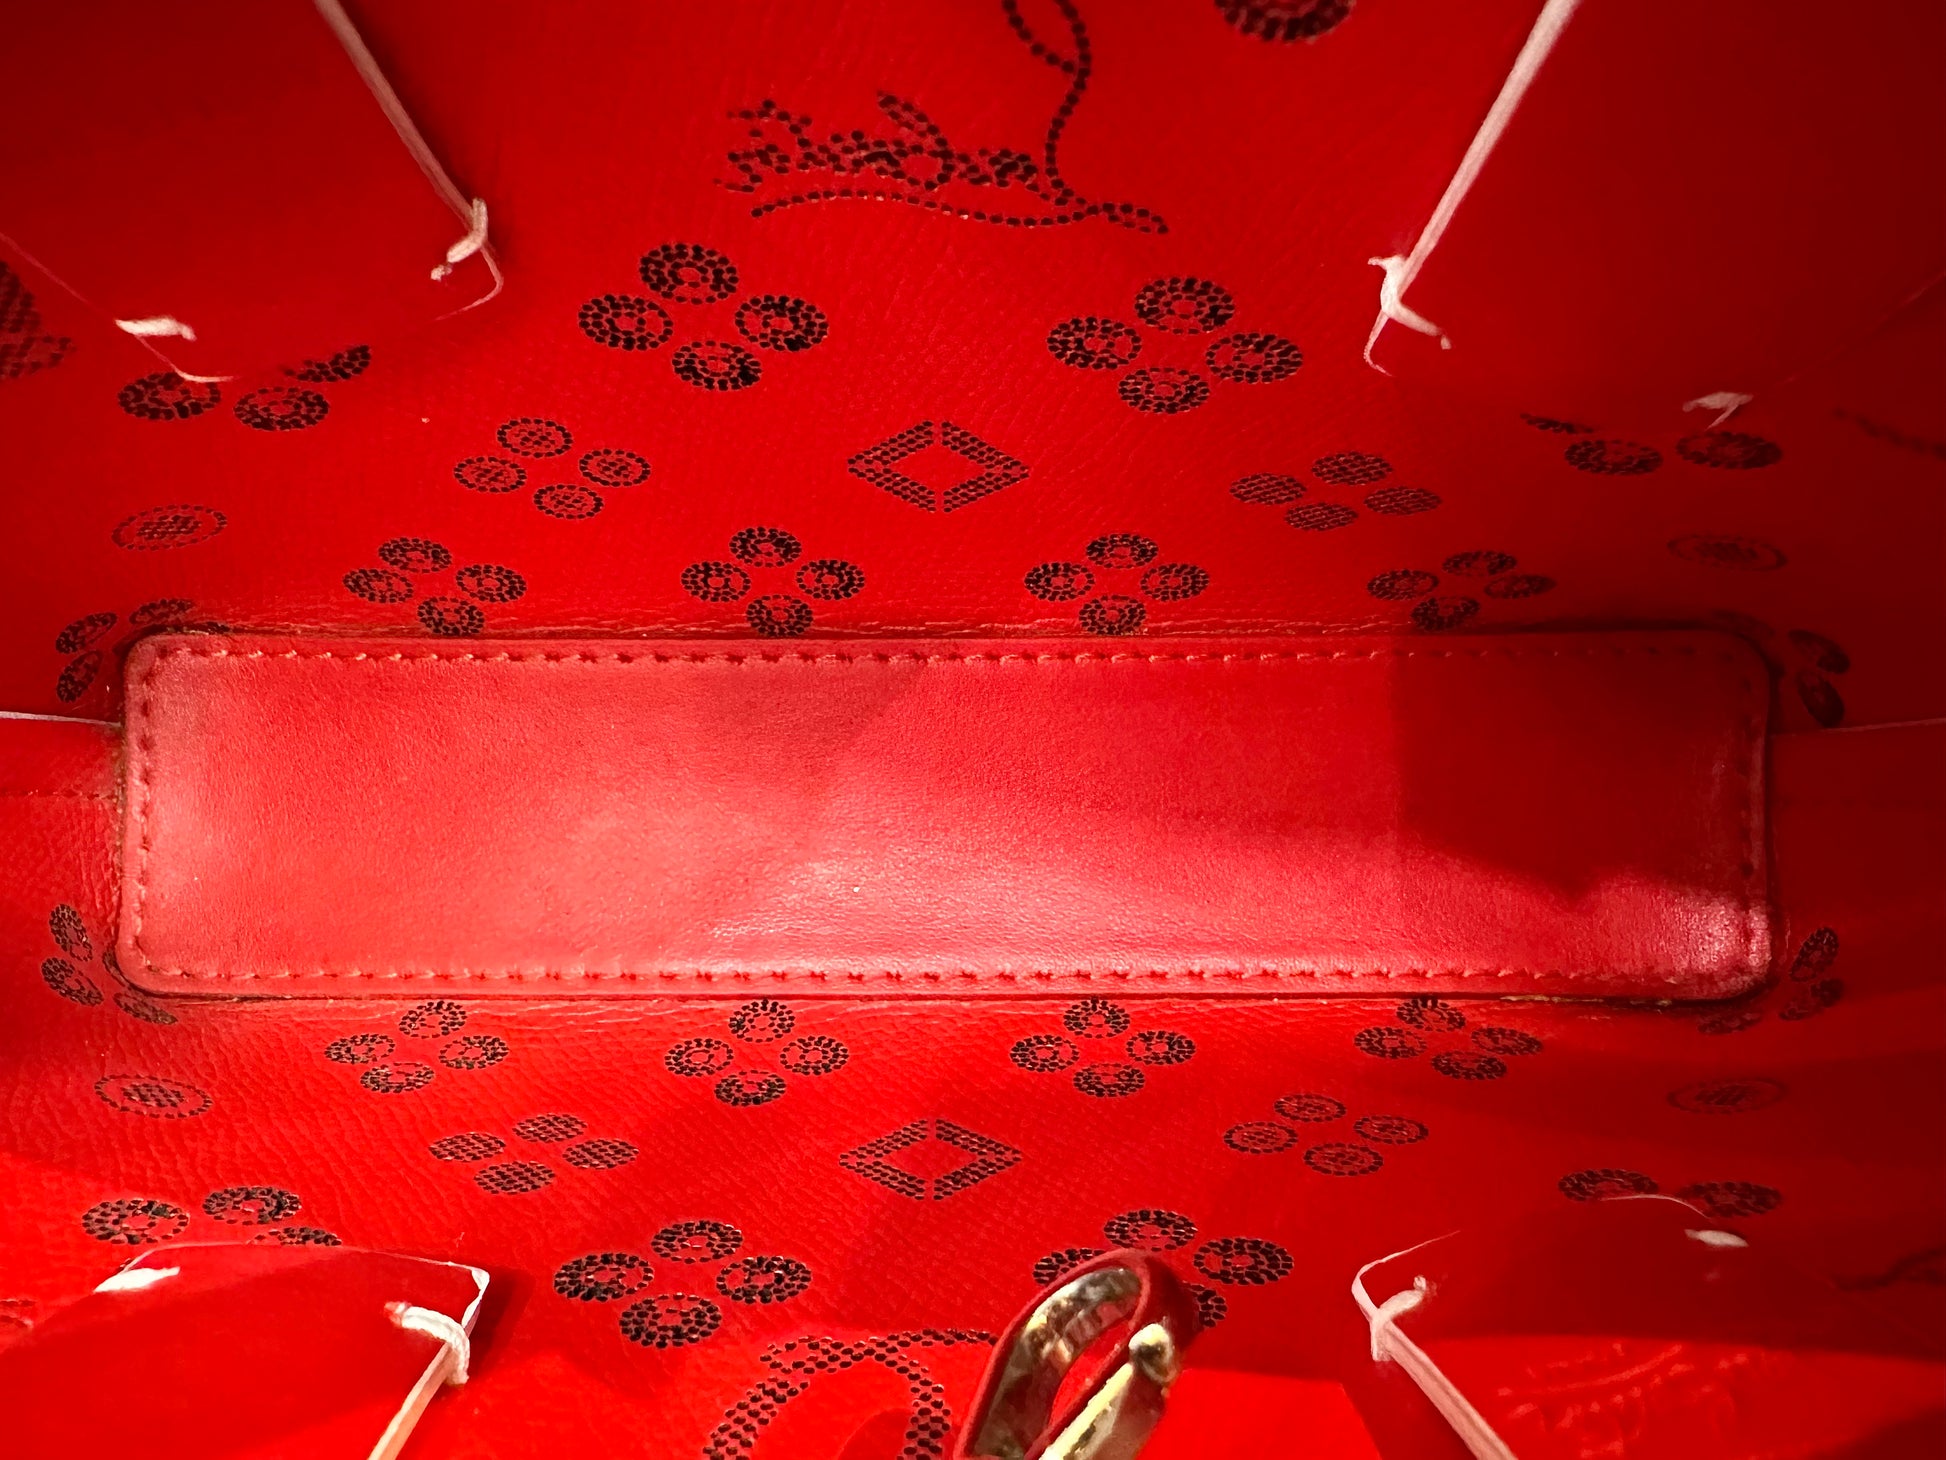 Close up red interior of bag with black Louboutin + CL signature 